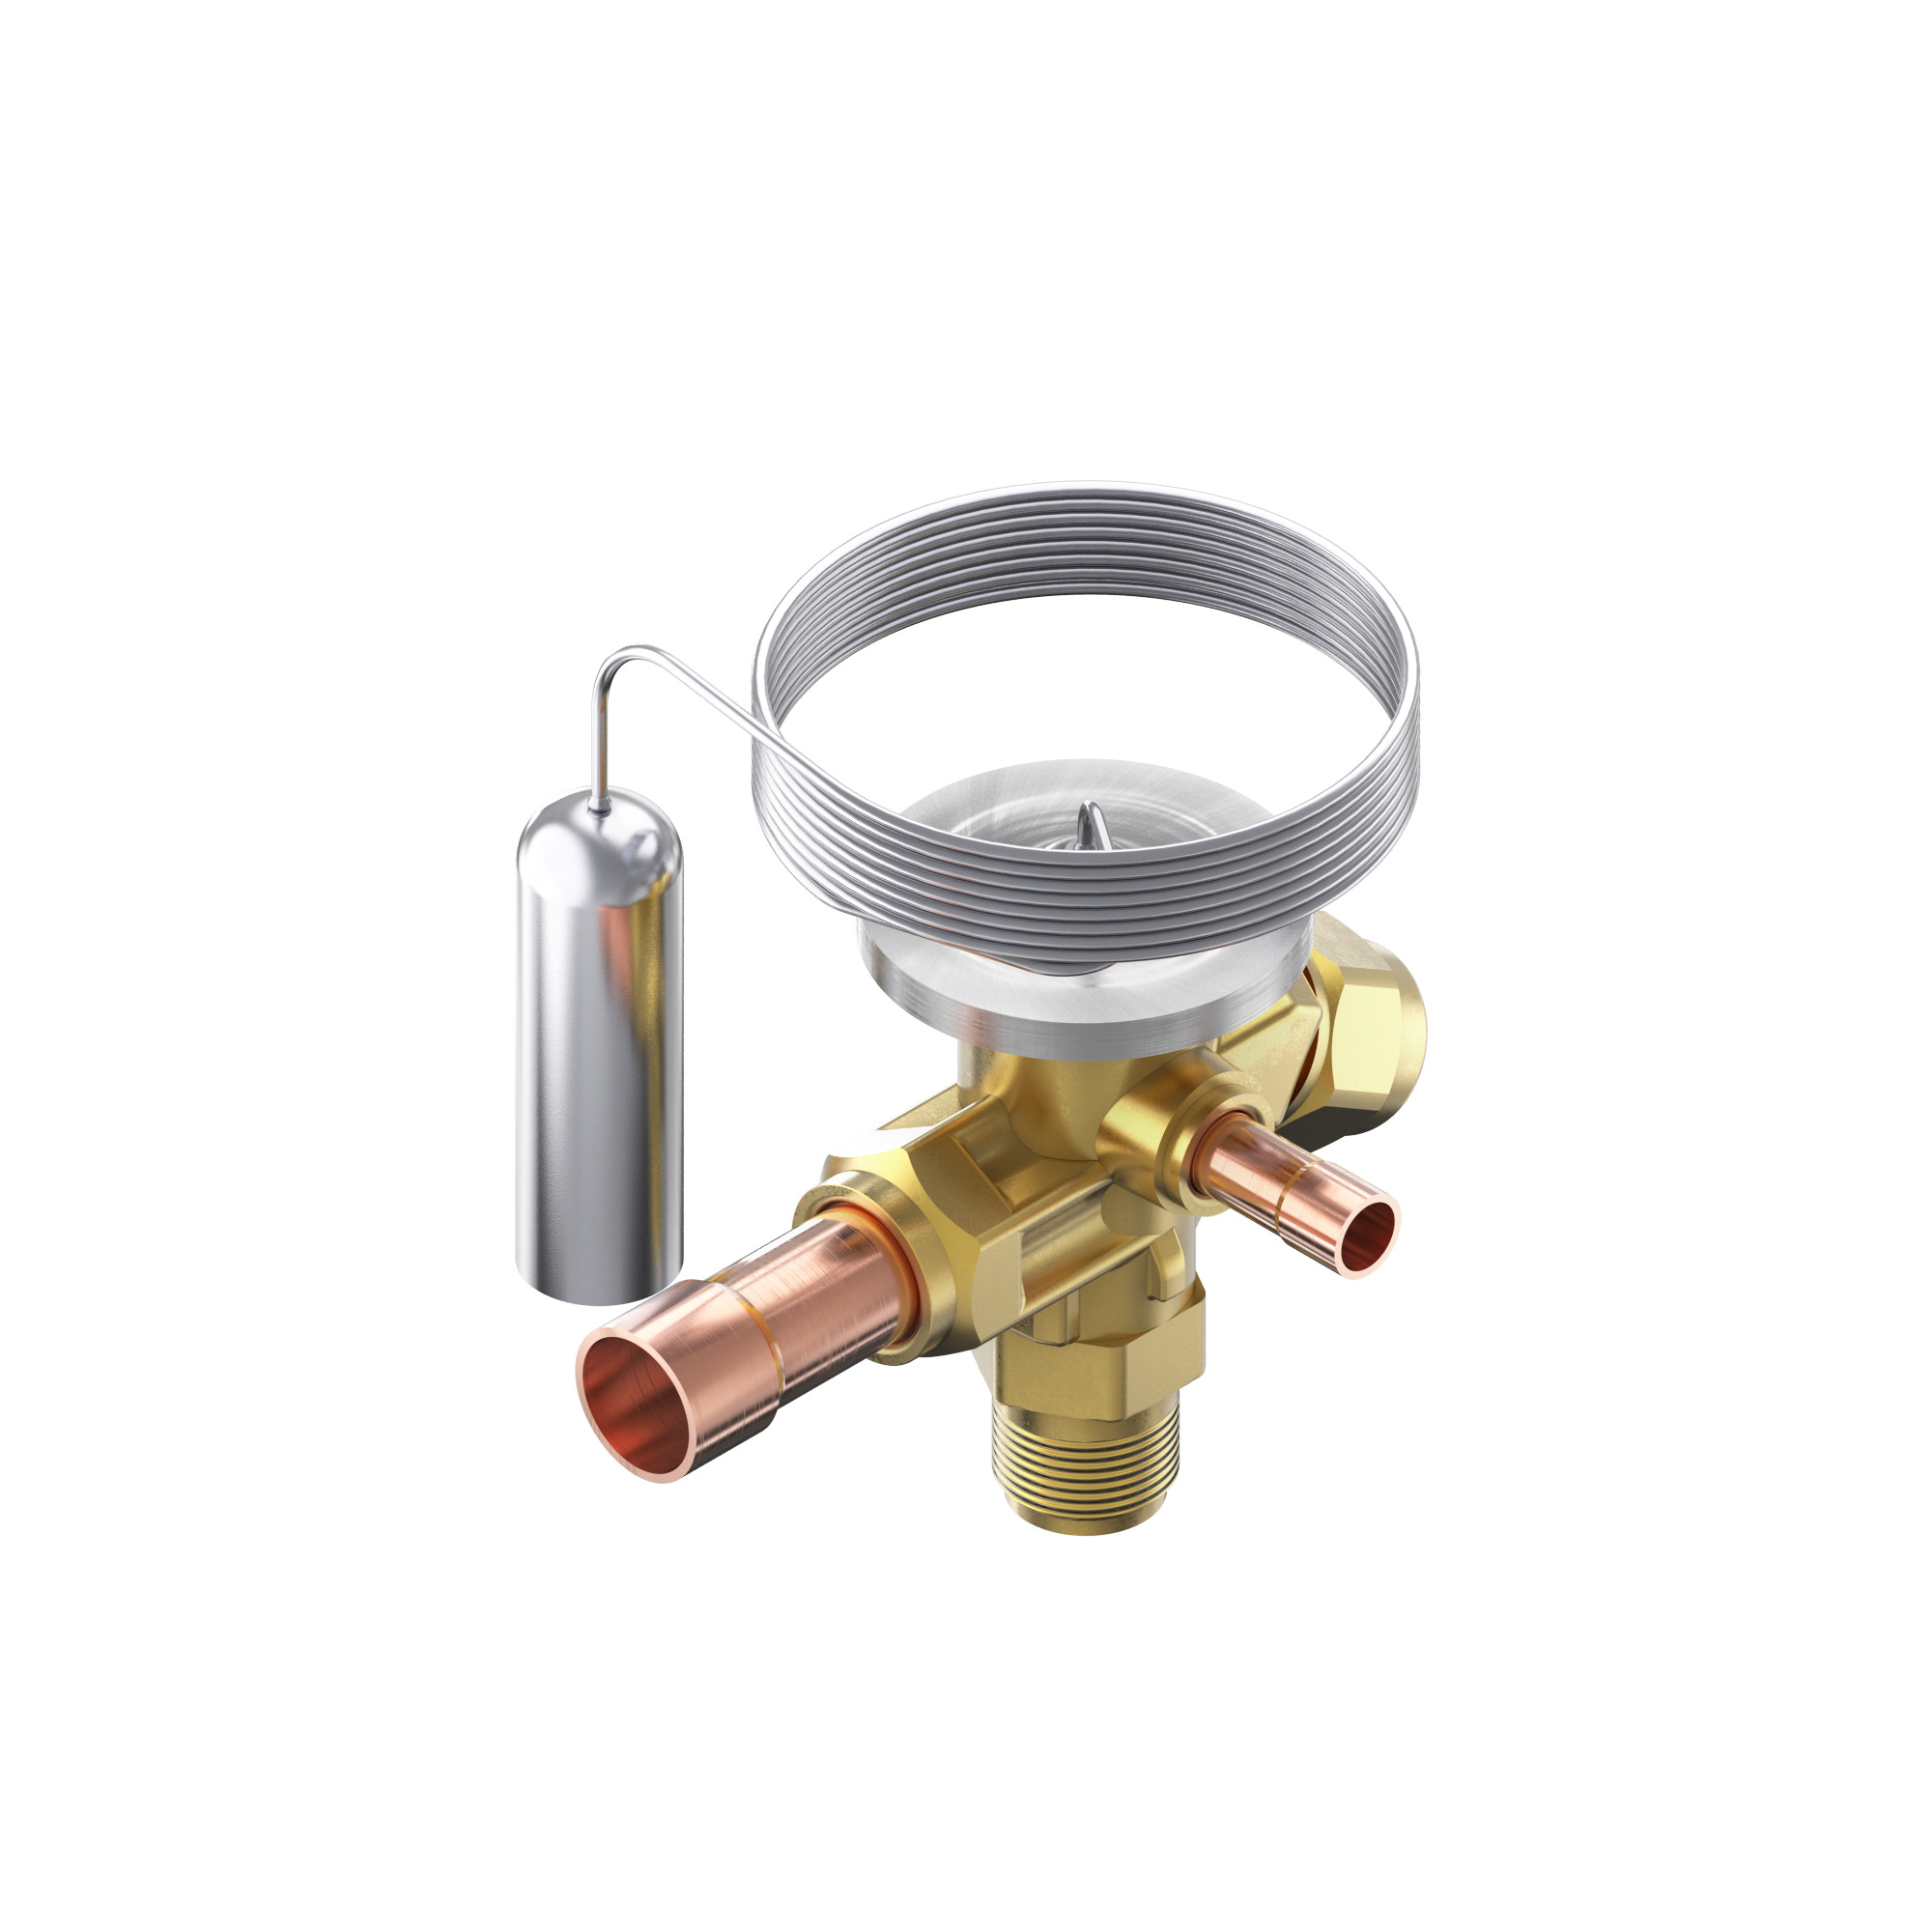 Thermostatic expansion valve, TE 2, R452A